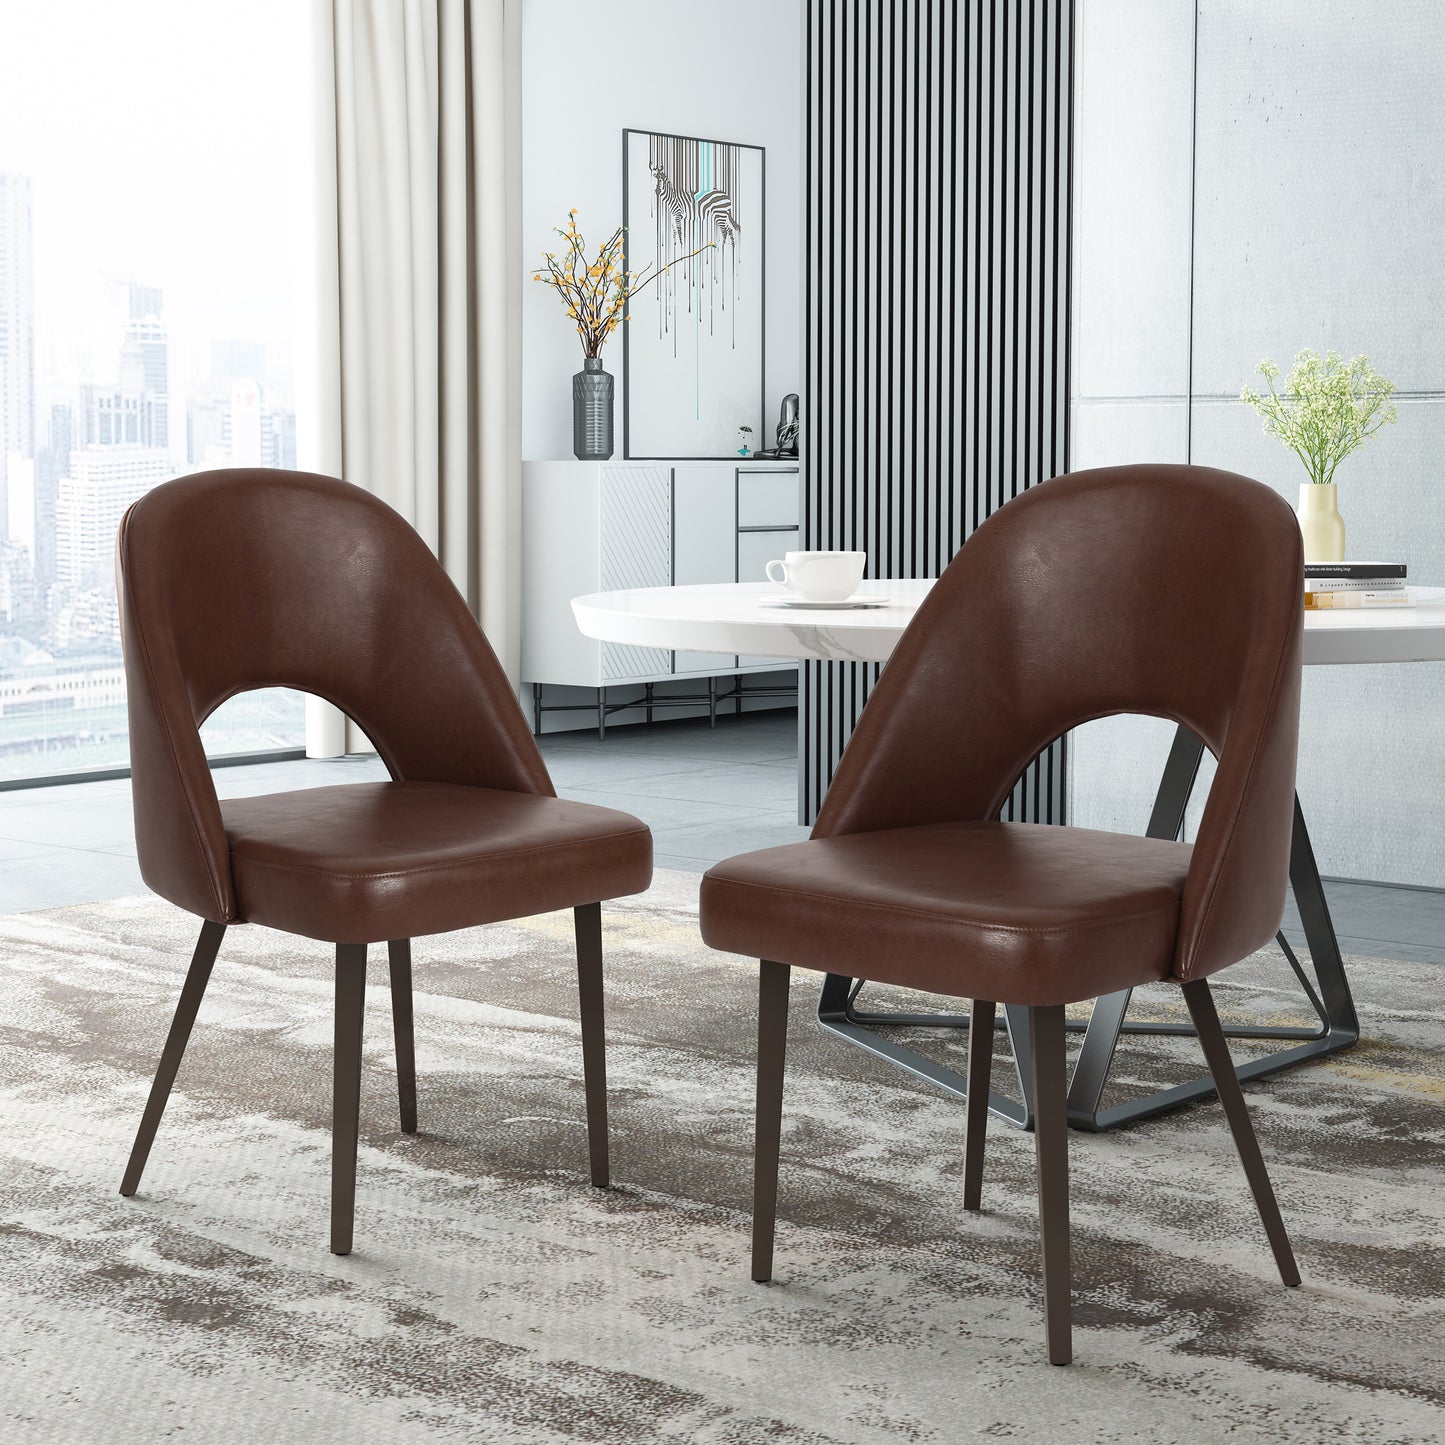 Odum Abbeville Contemporary Open Back Dining Chairs, Set of 2